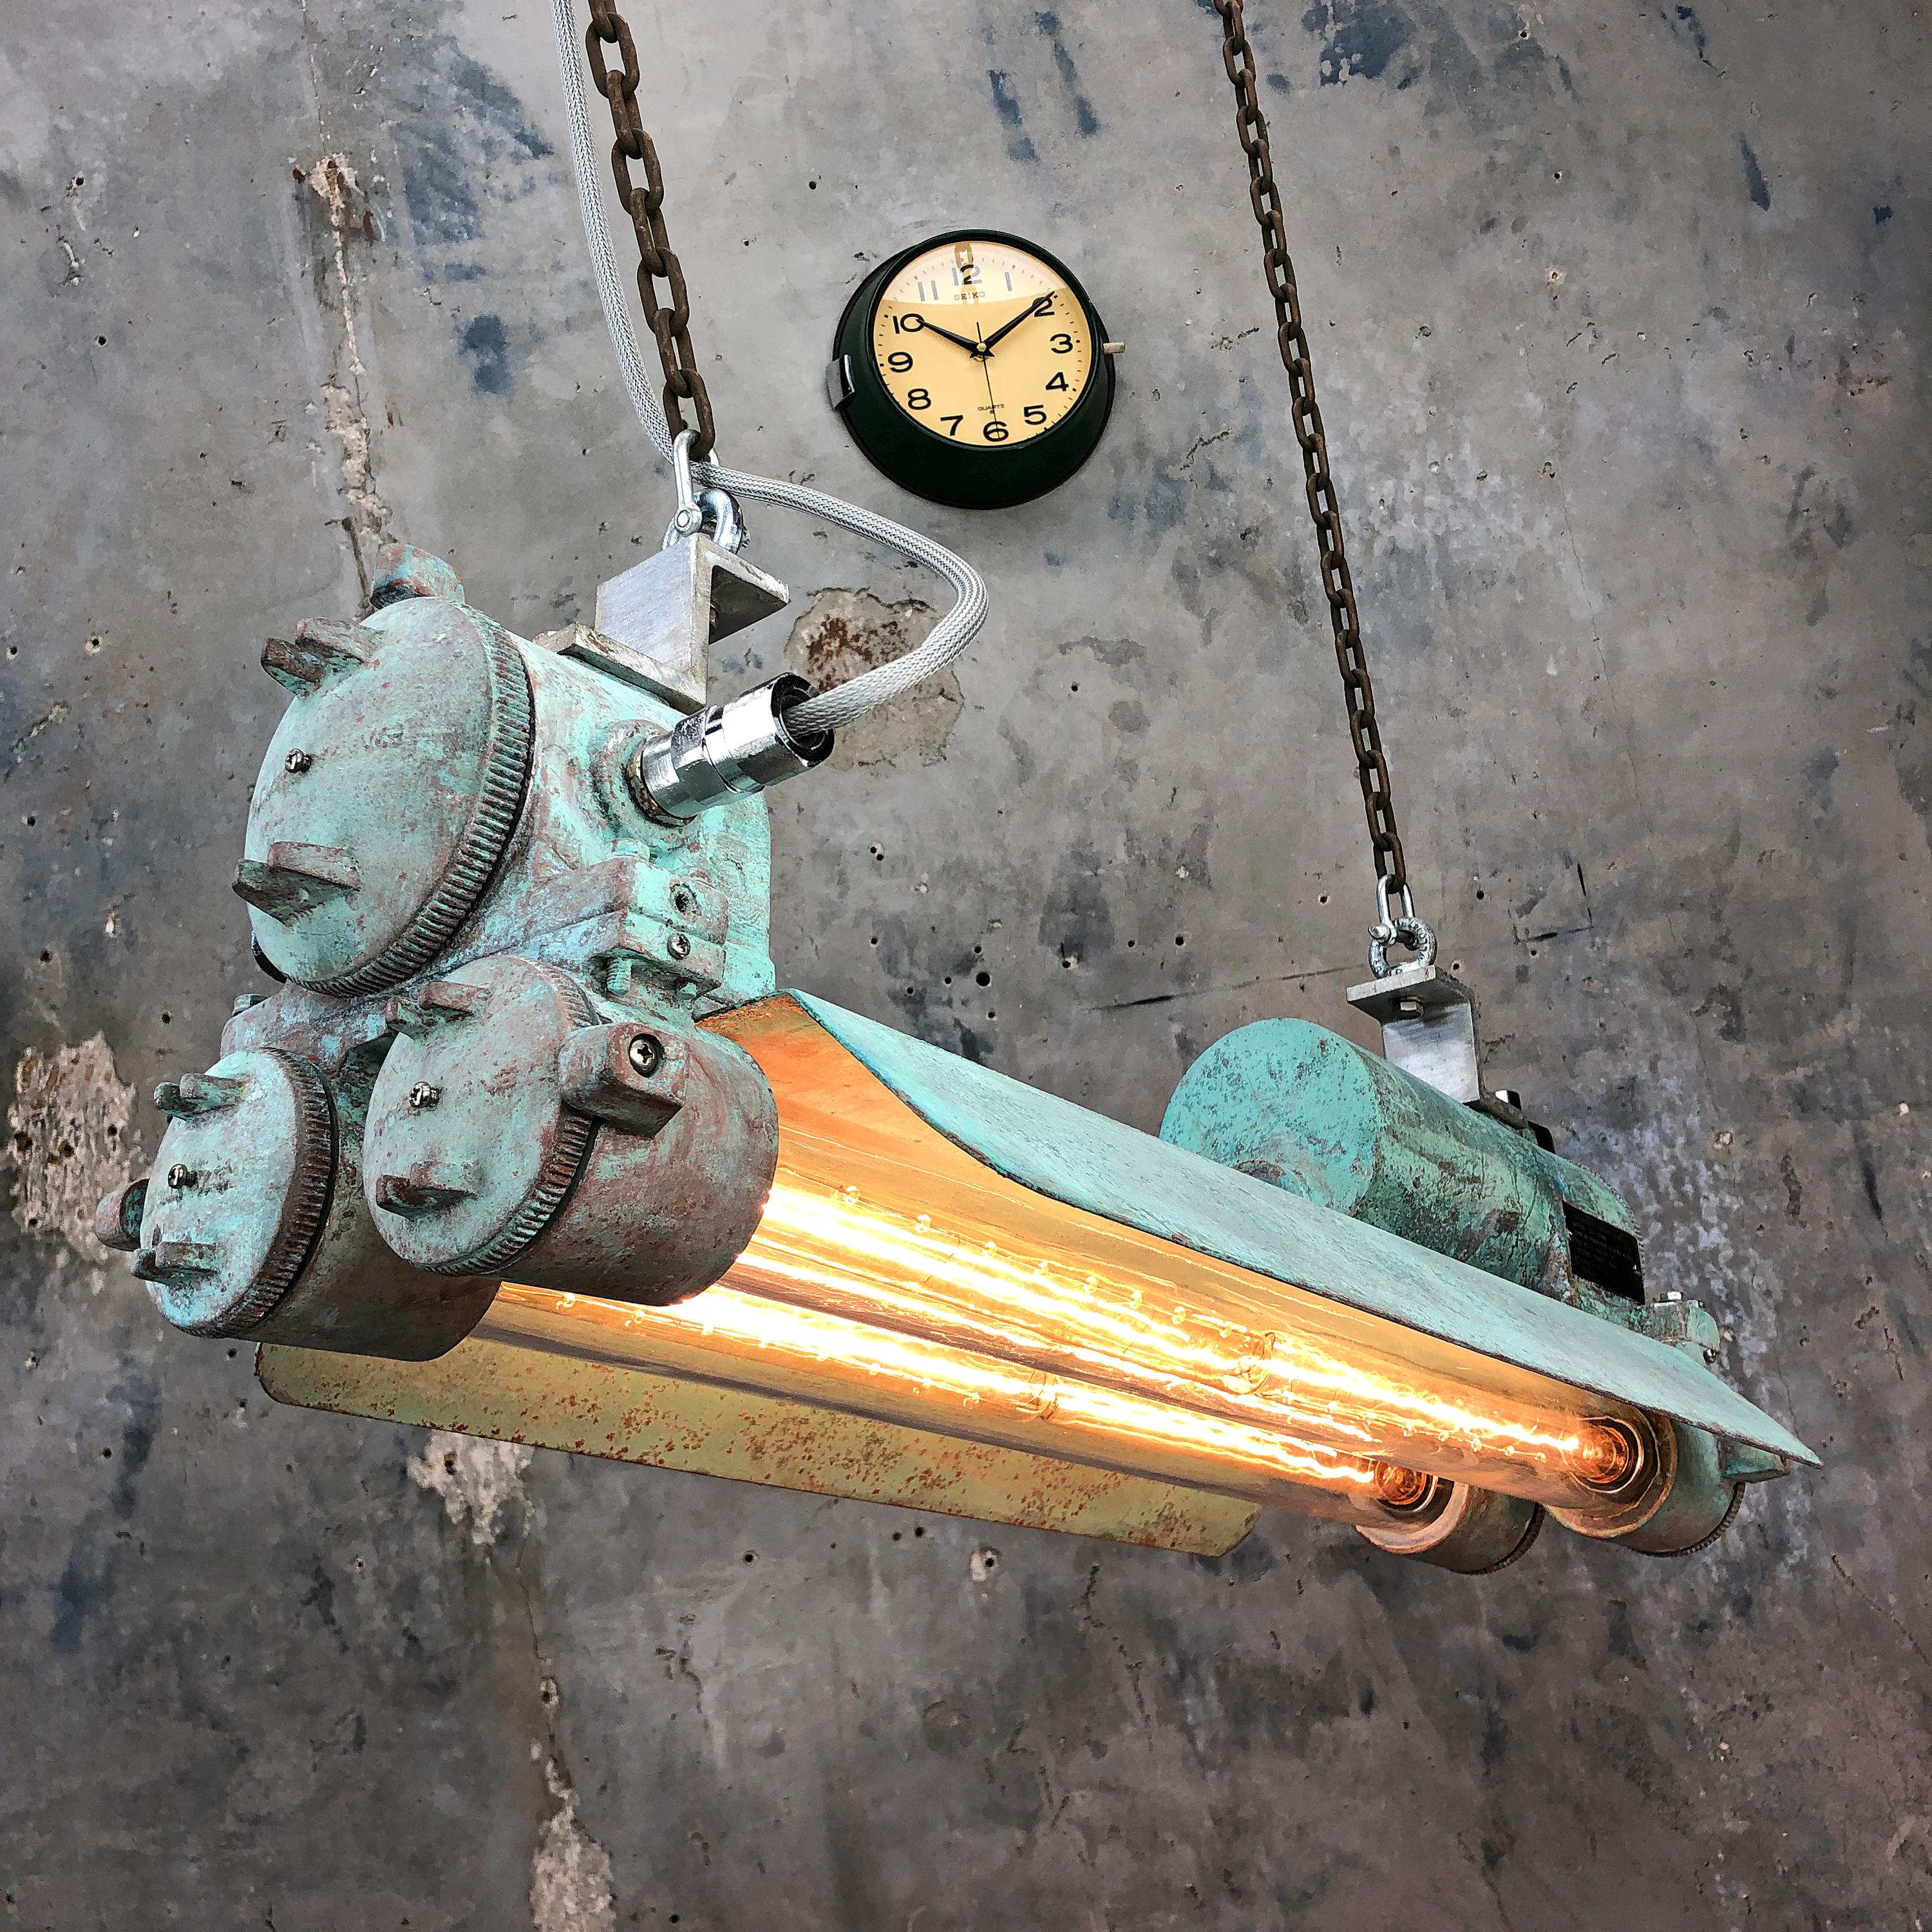 Reclaimed vintage industrial Korean flameproof striplight made by Daeyang in the 1970's with an applied copper based verdigris rust effect.
 
Original item salvaged from supertankers and military vessels then professionally restored by Loomlight in